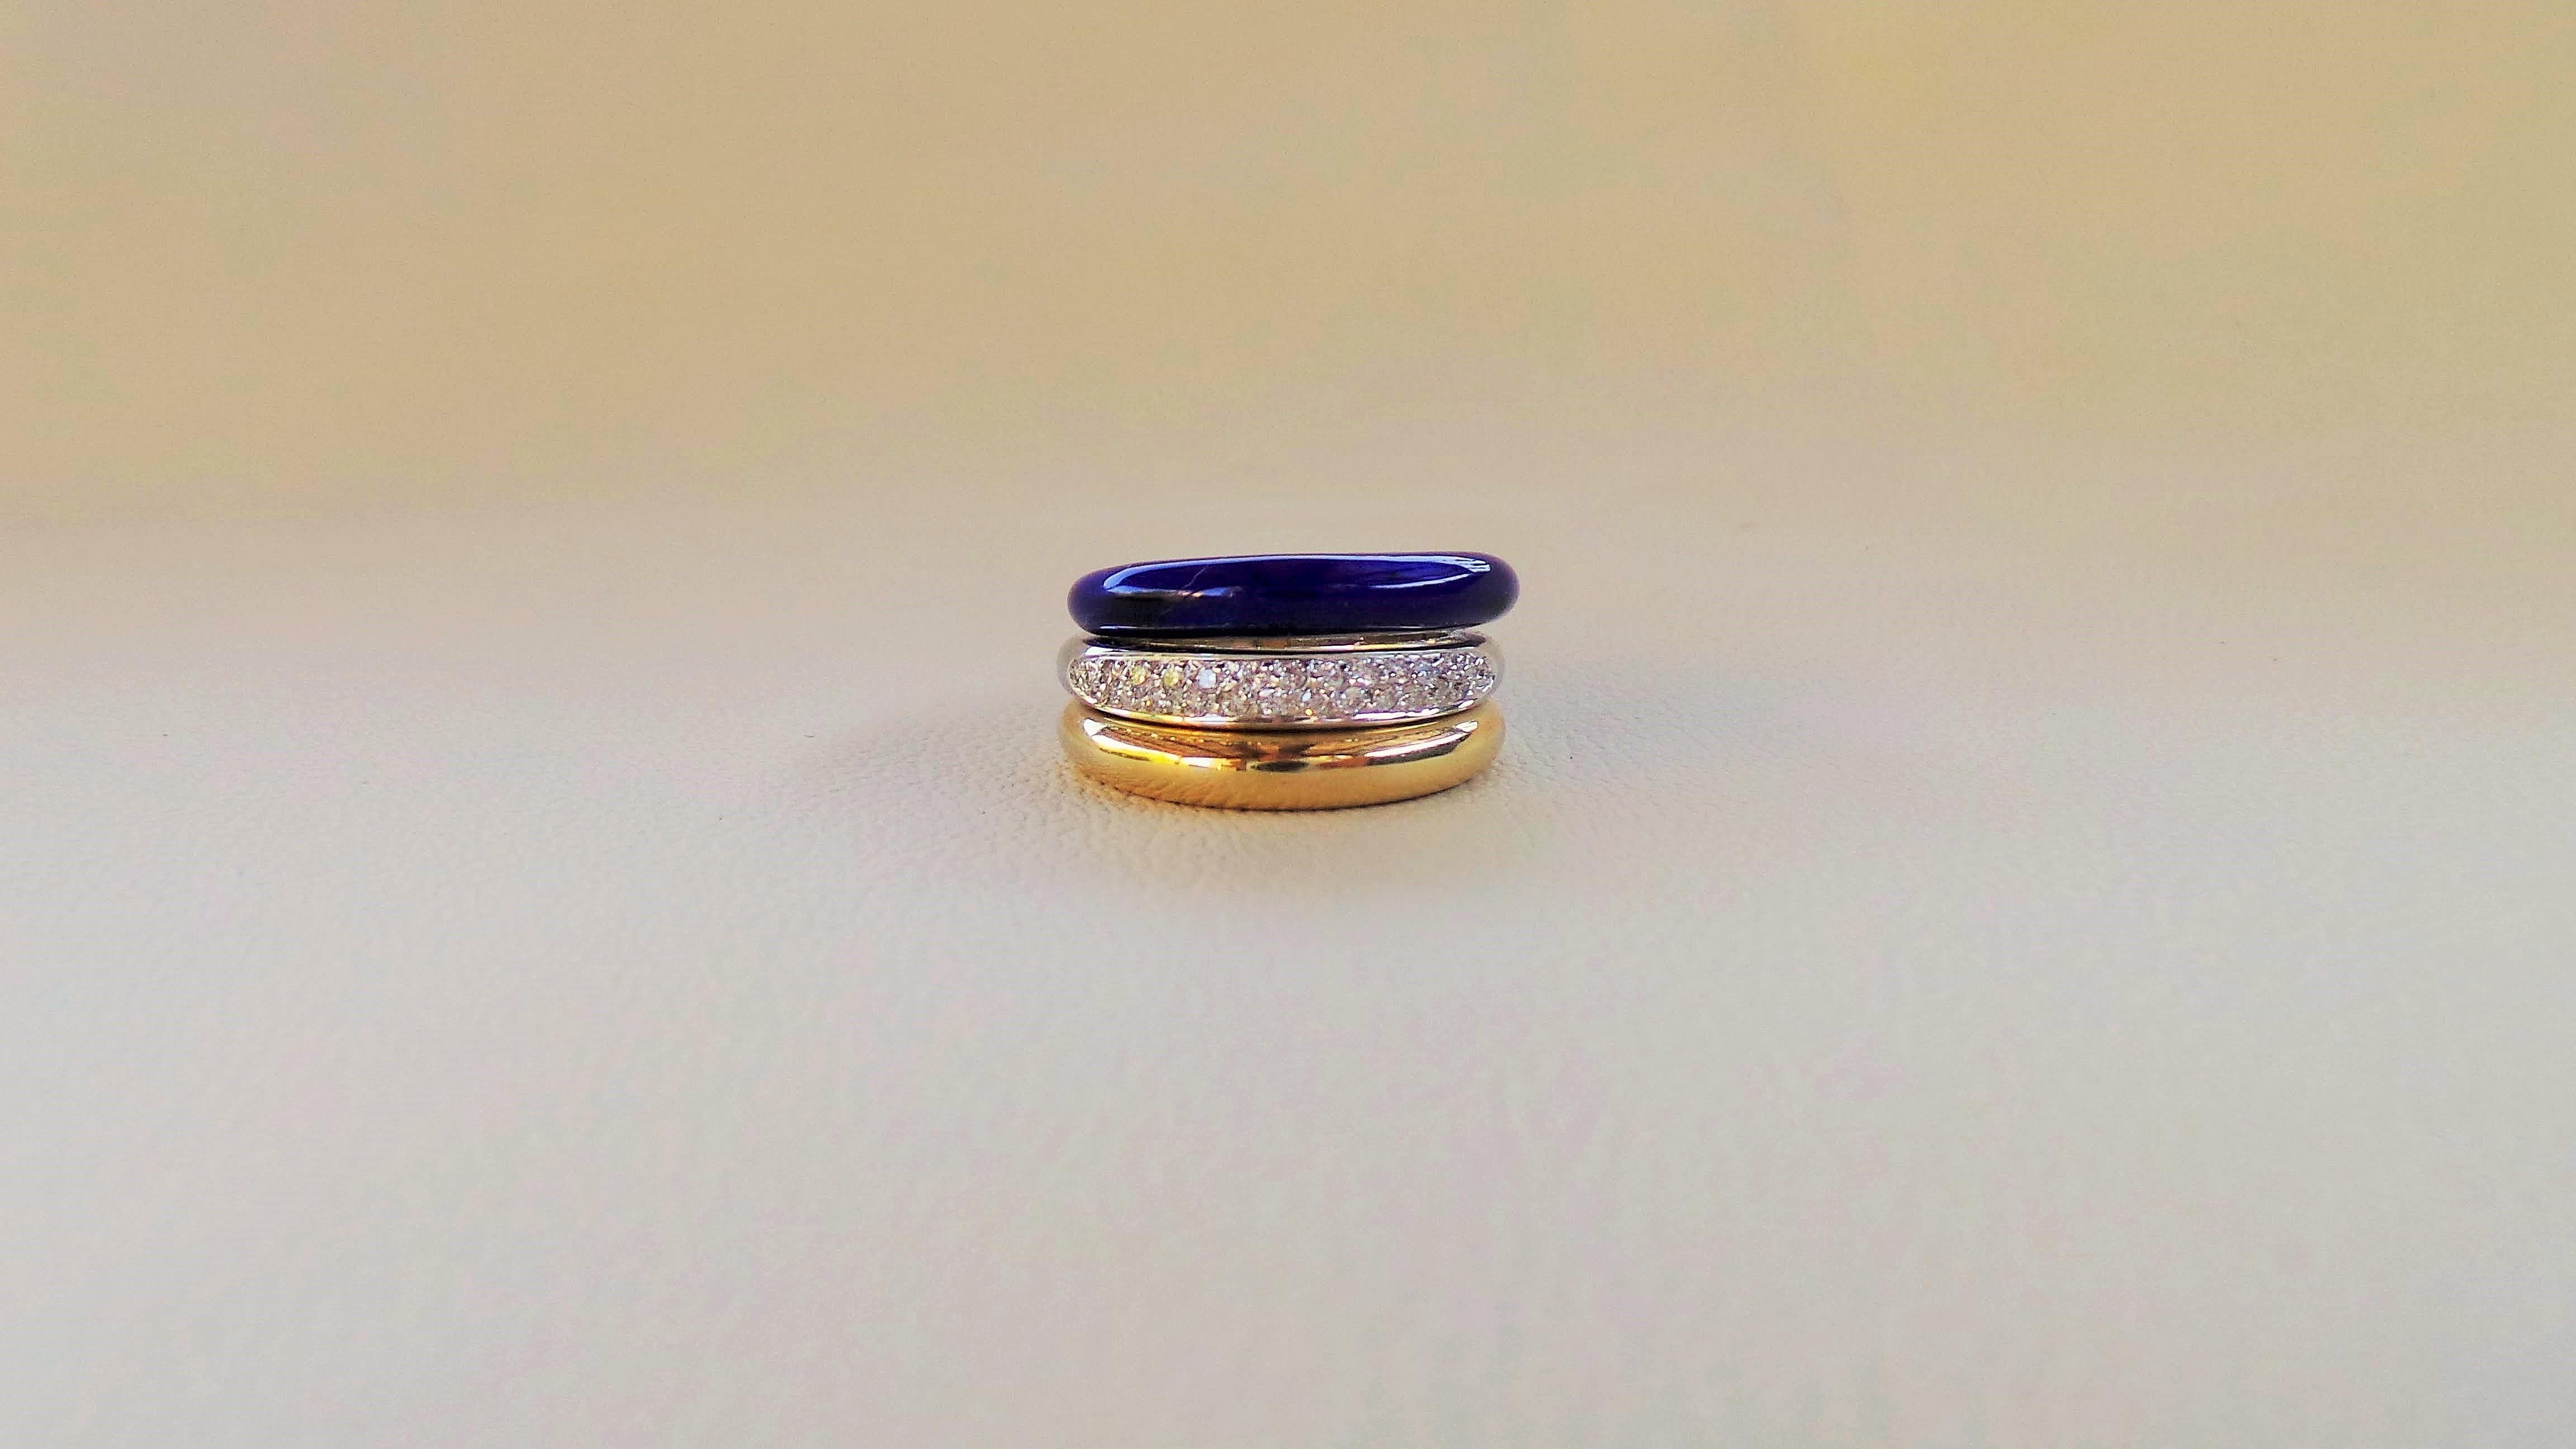 Andrea Macinai create a dedicated collection for band rings with diamonds and enamel.
Ring with clean and modern lines ,one line in yellow gold, one diamonds pavè 0.67K cut-brillant and the third in enamel cobalt blue. The combination of the three